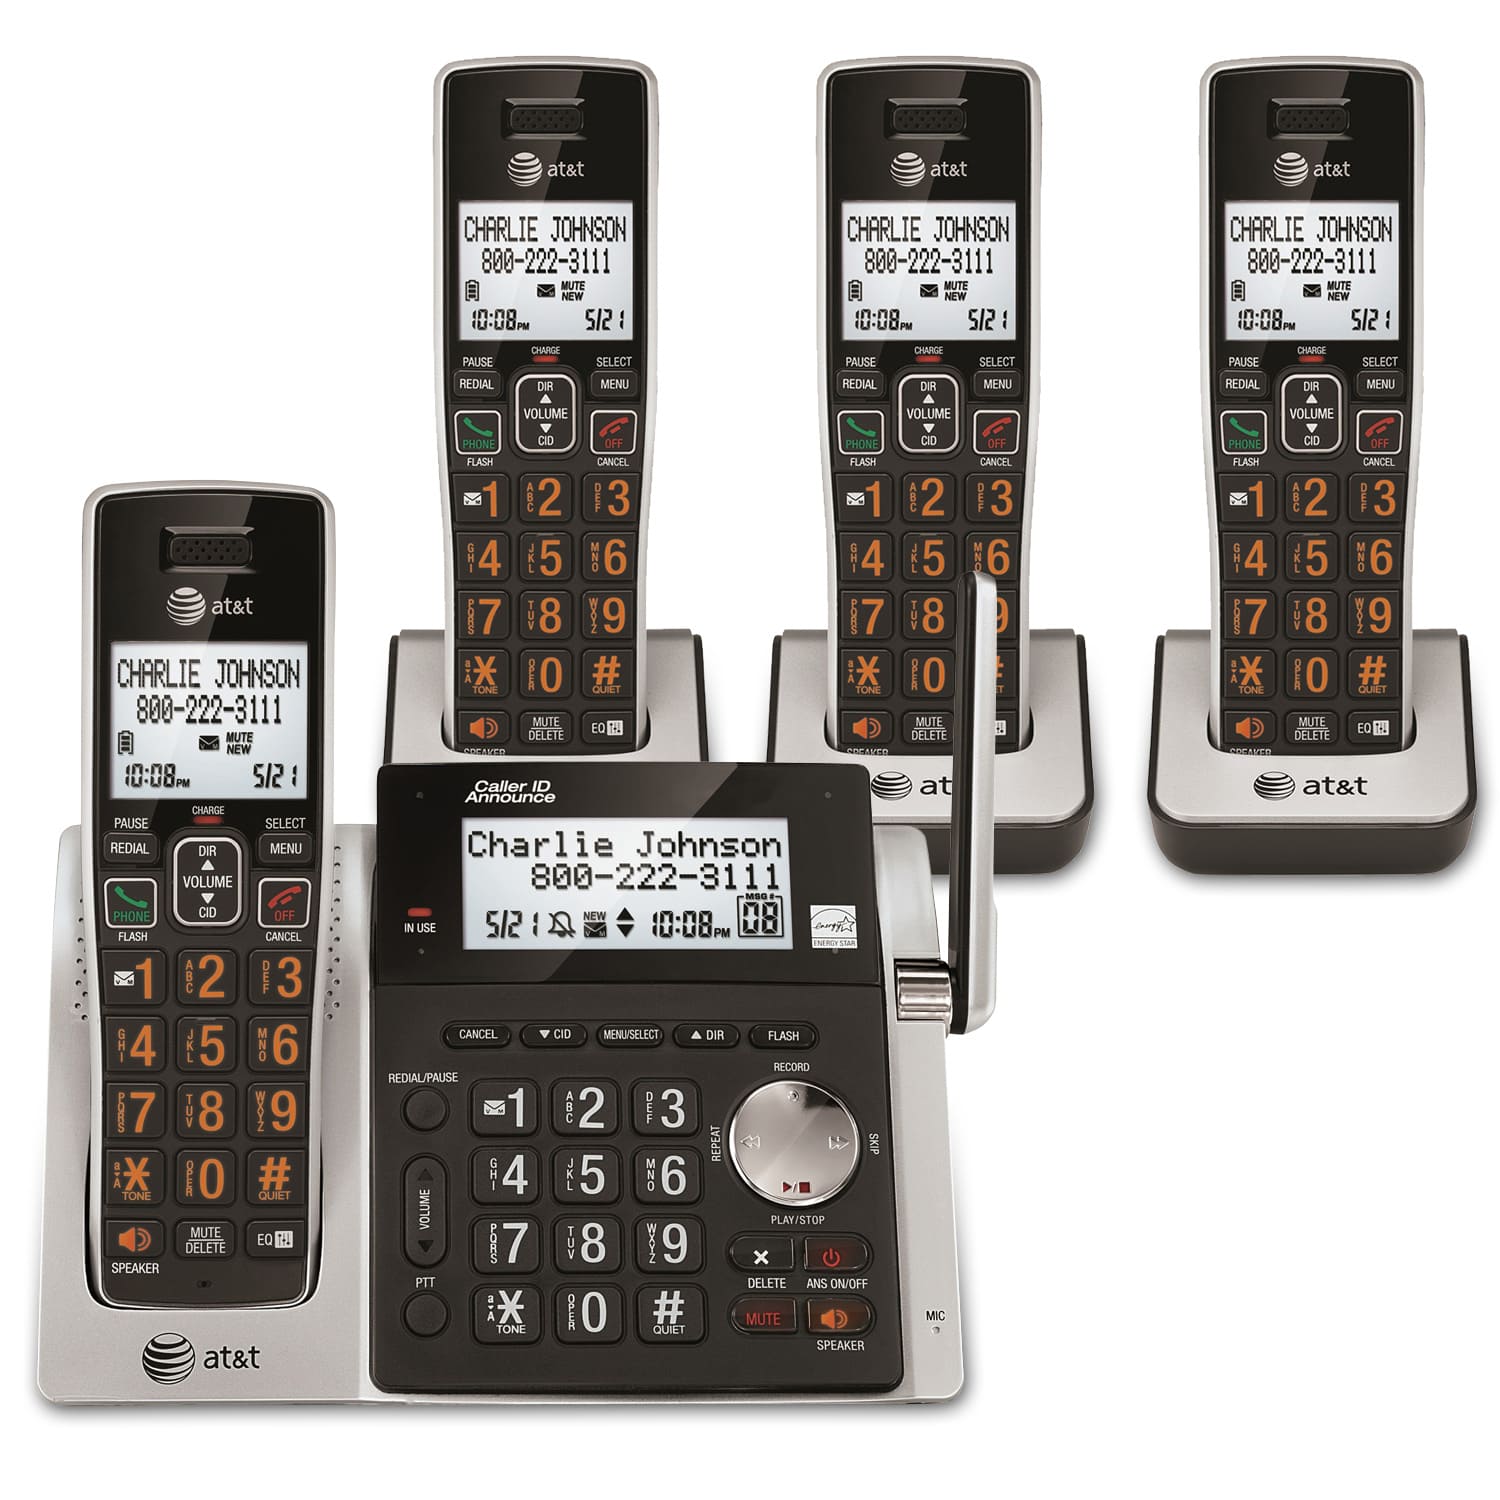 4 handset cordless answering system with dual caller ID/call waiting2 - view 1